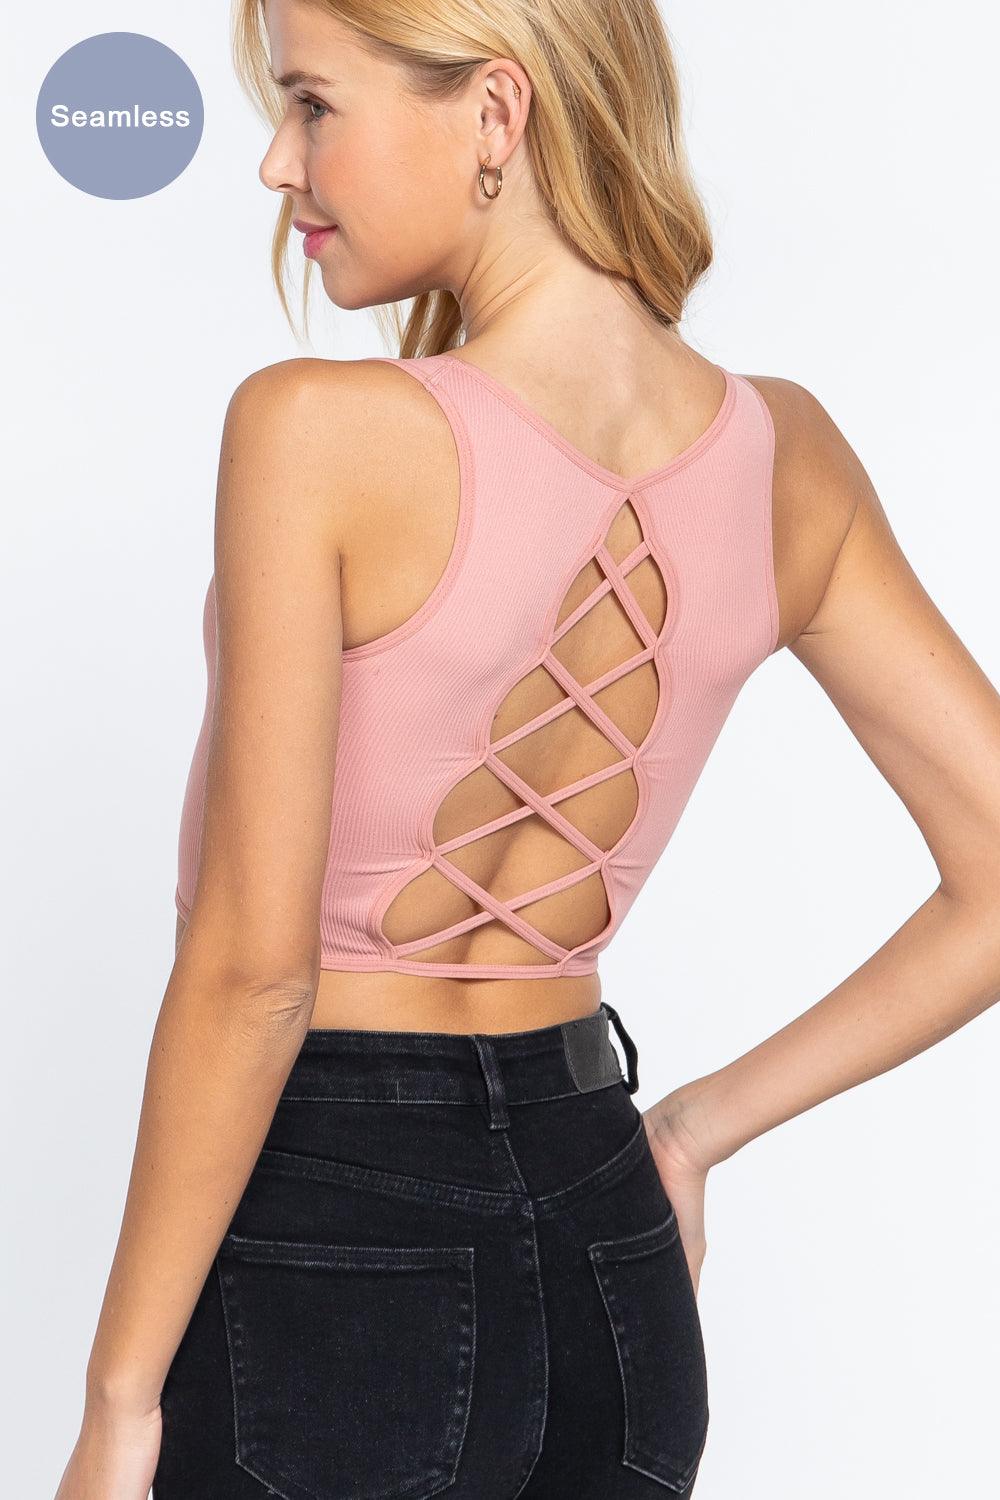 Sleeveless Scoop Neck Back Lace-up Detail Seamless Rib Knit Top - Kreative Passions